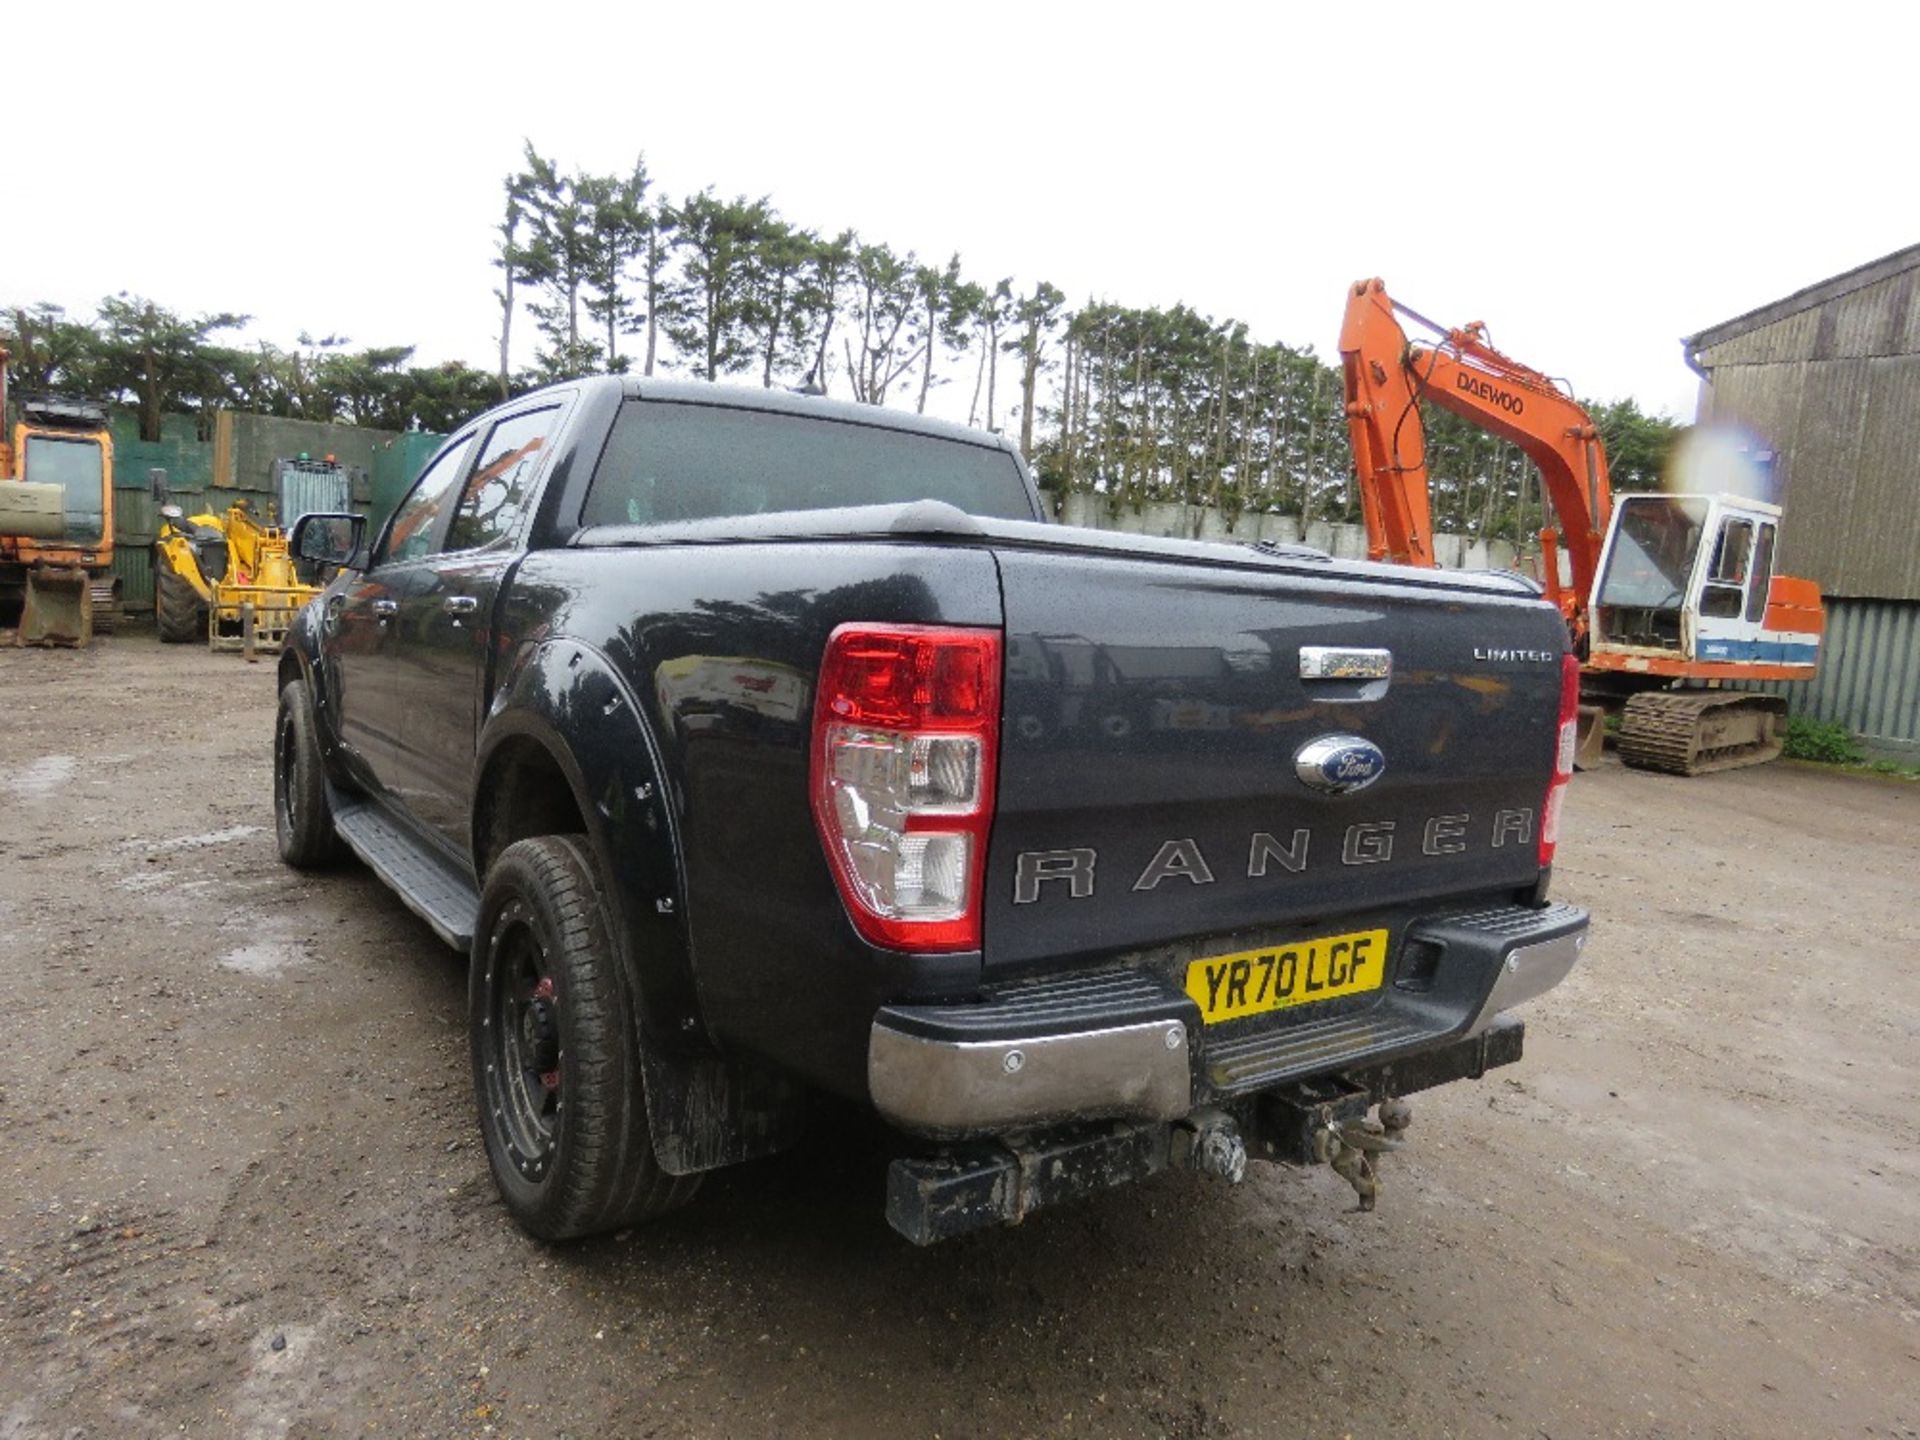 FORD RANGER LIMITED EDITION DOUBLE CAB PICKUP, AUTOMATIC, REG:YR70 LGF. 110,287 REC MILES. 2 LITRE - Image 6 of 15